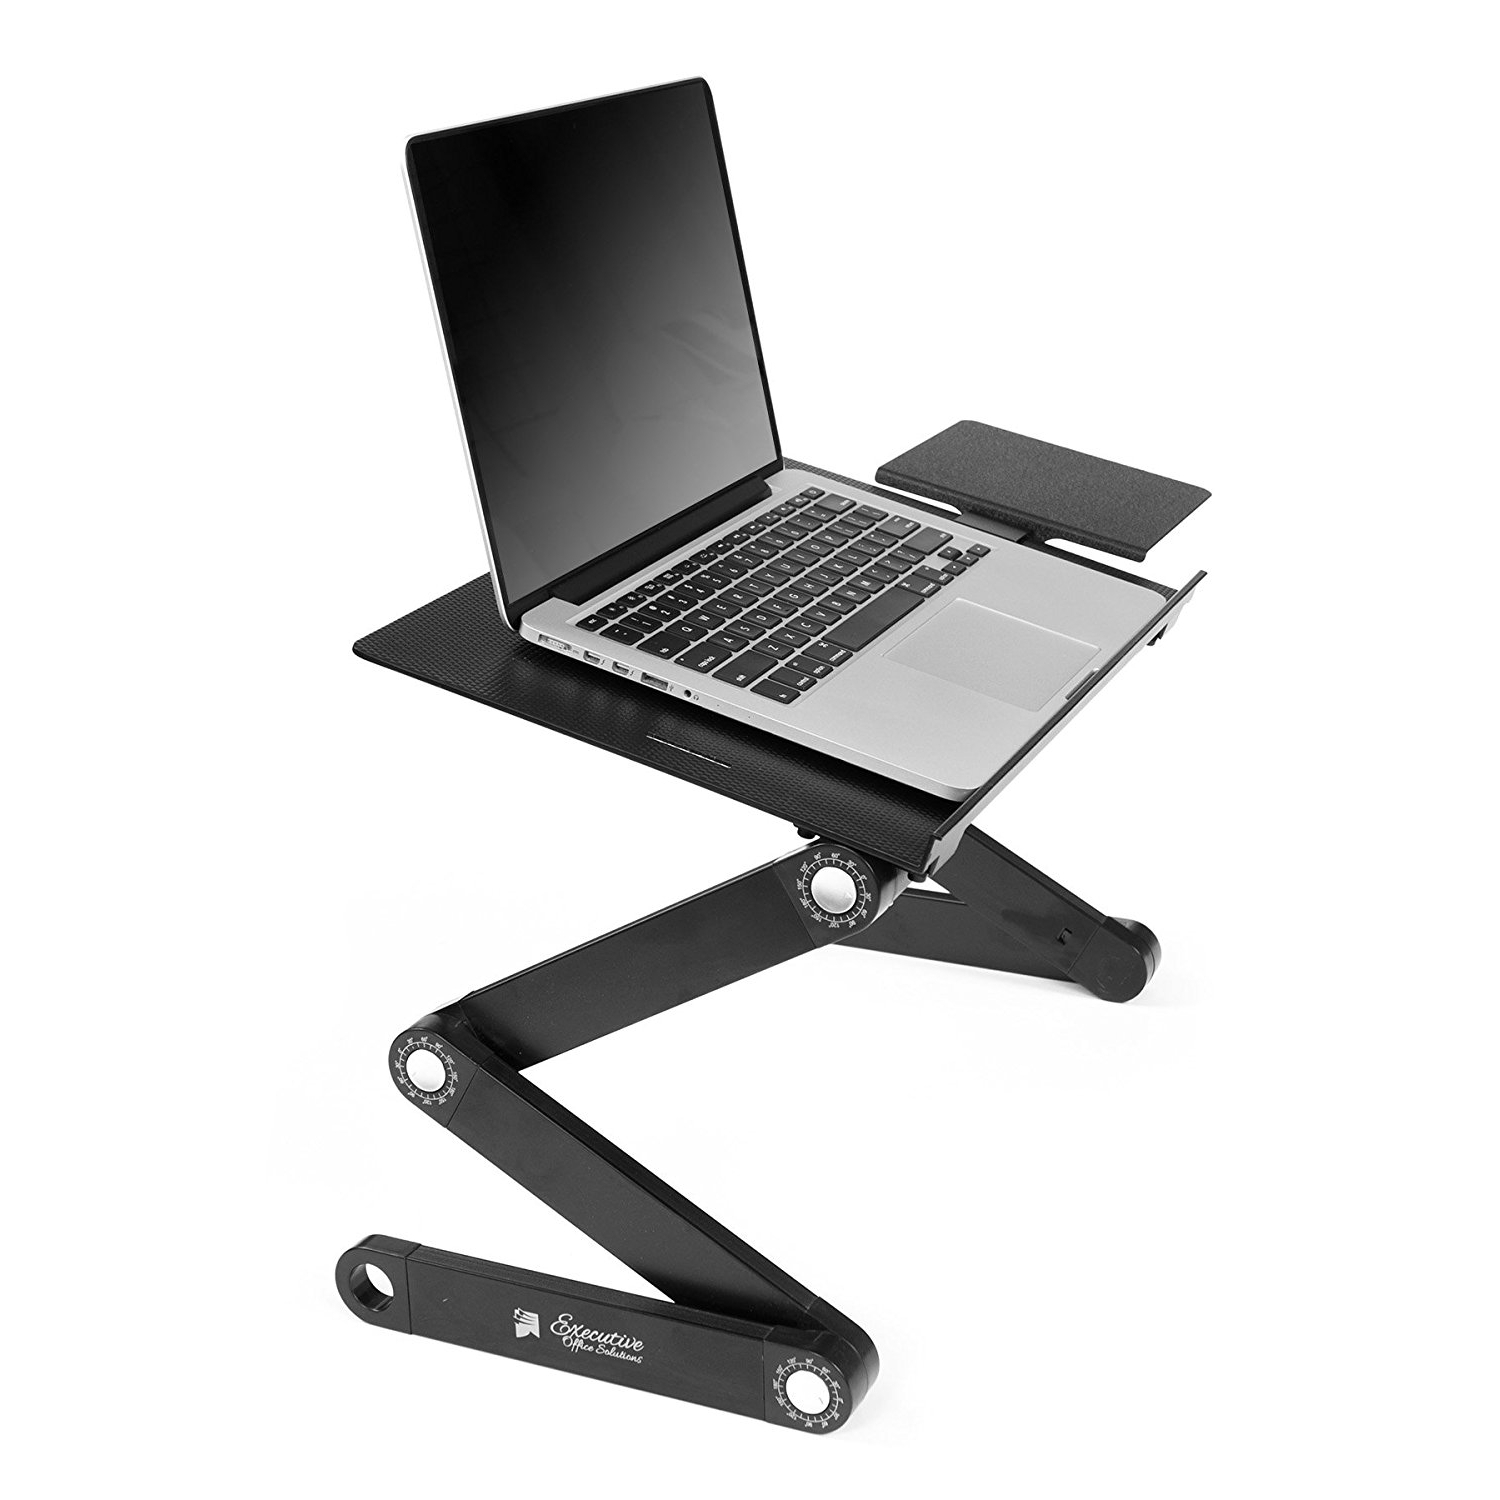 AYNEFY Folding Laptop Stand 360 Degree Adjustable Notebook Desk Table Tray Computer Holder Base for Living Room Study Room Office School Teacher Student Workers Black 